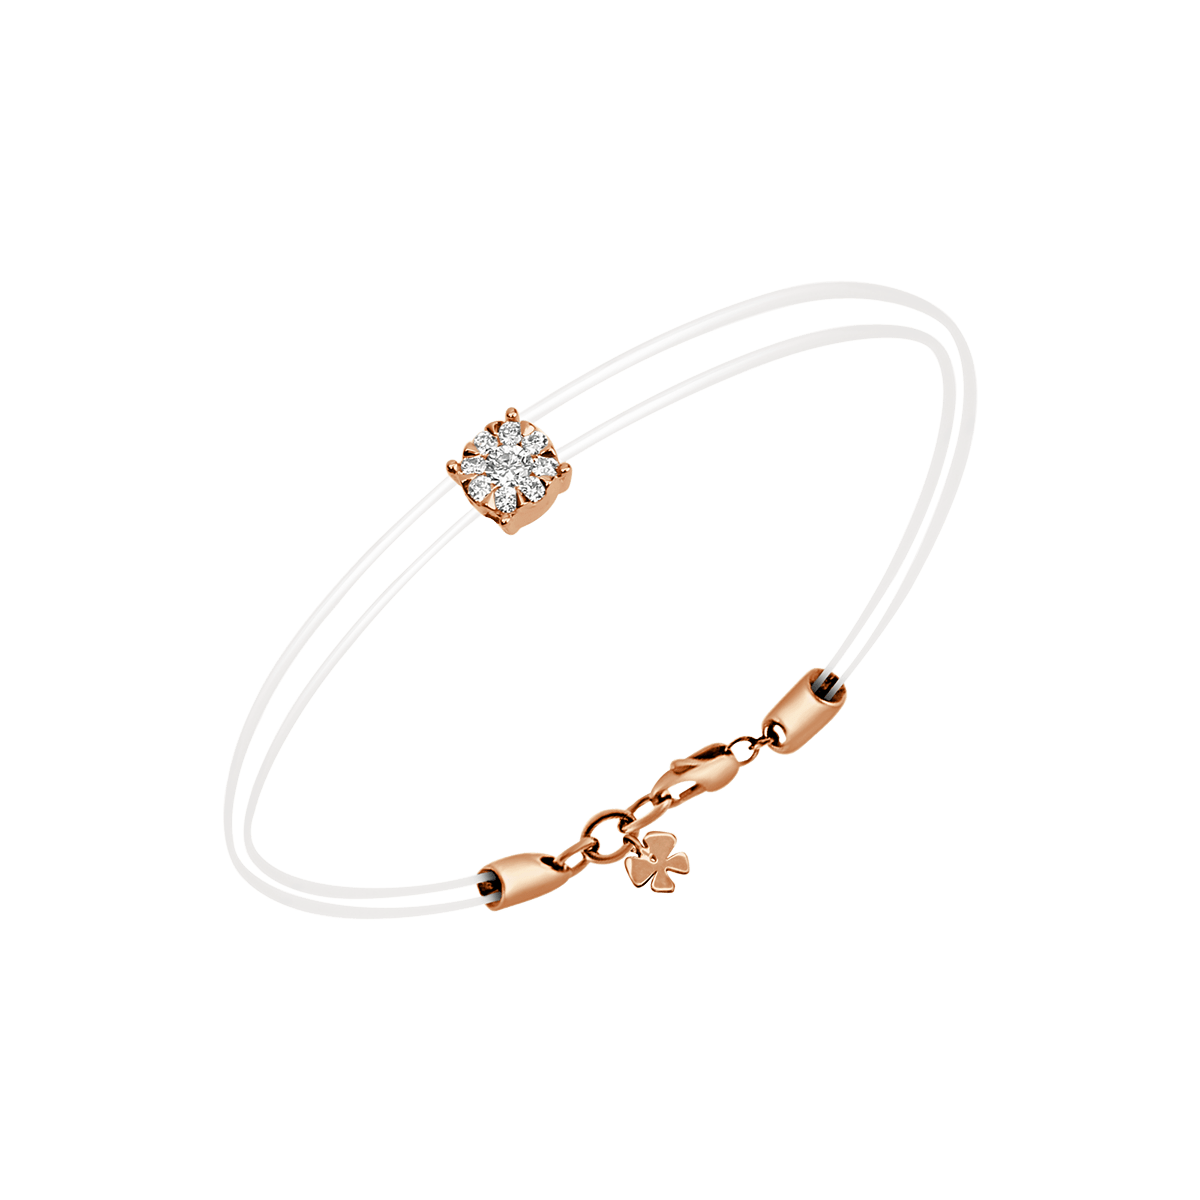 Round Illusion Bracelet In 18 K Yellow Gold and 1.00 Carat Look From Aura Collection